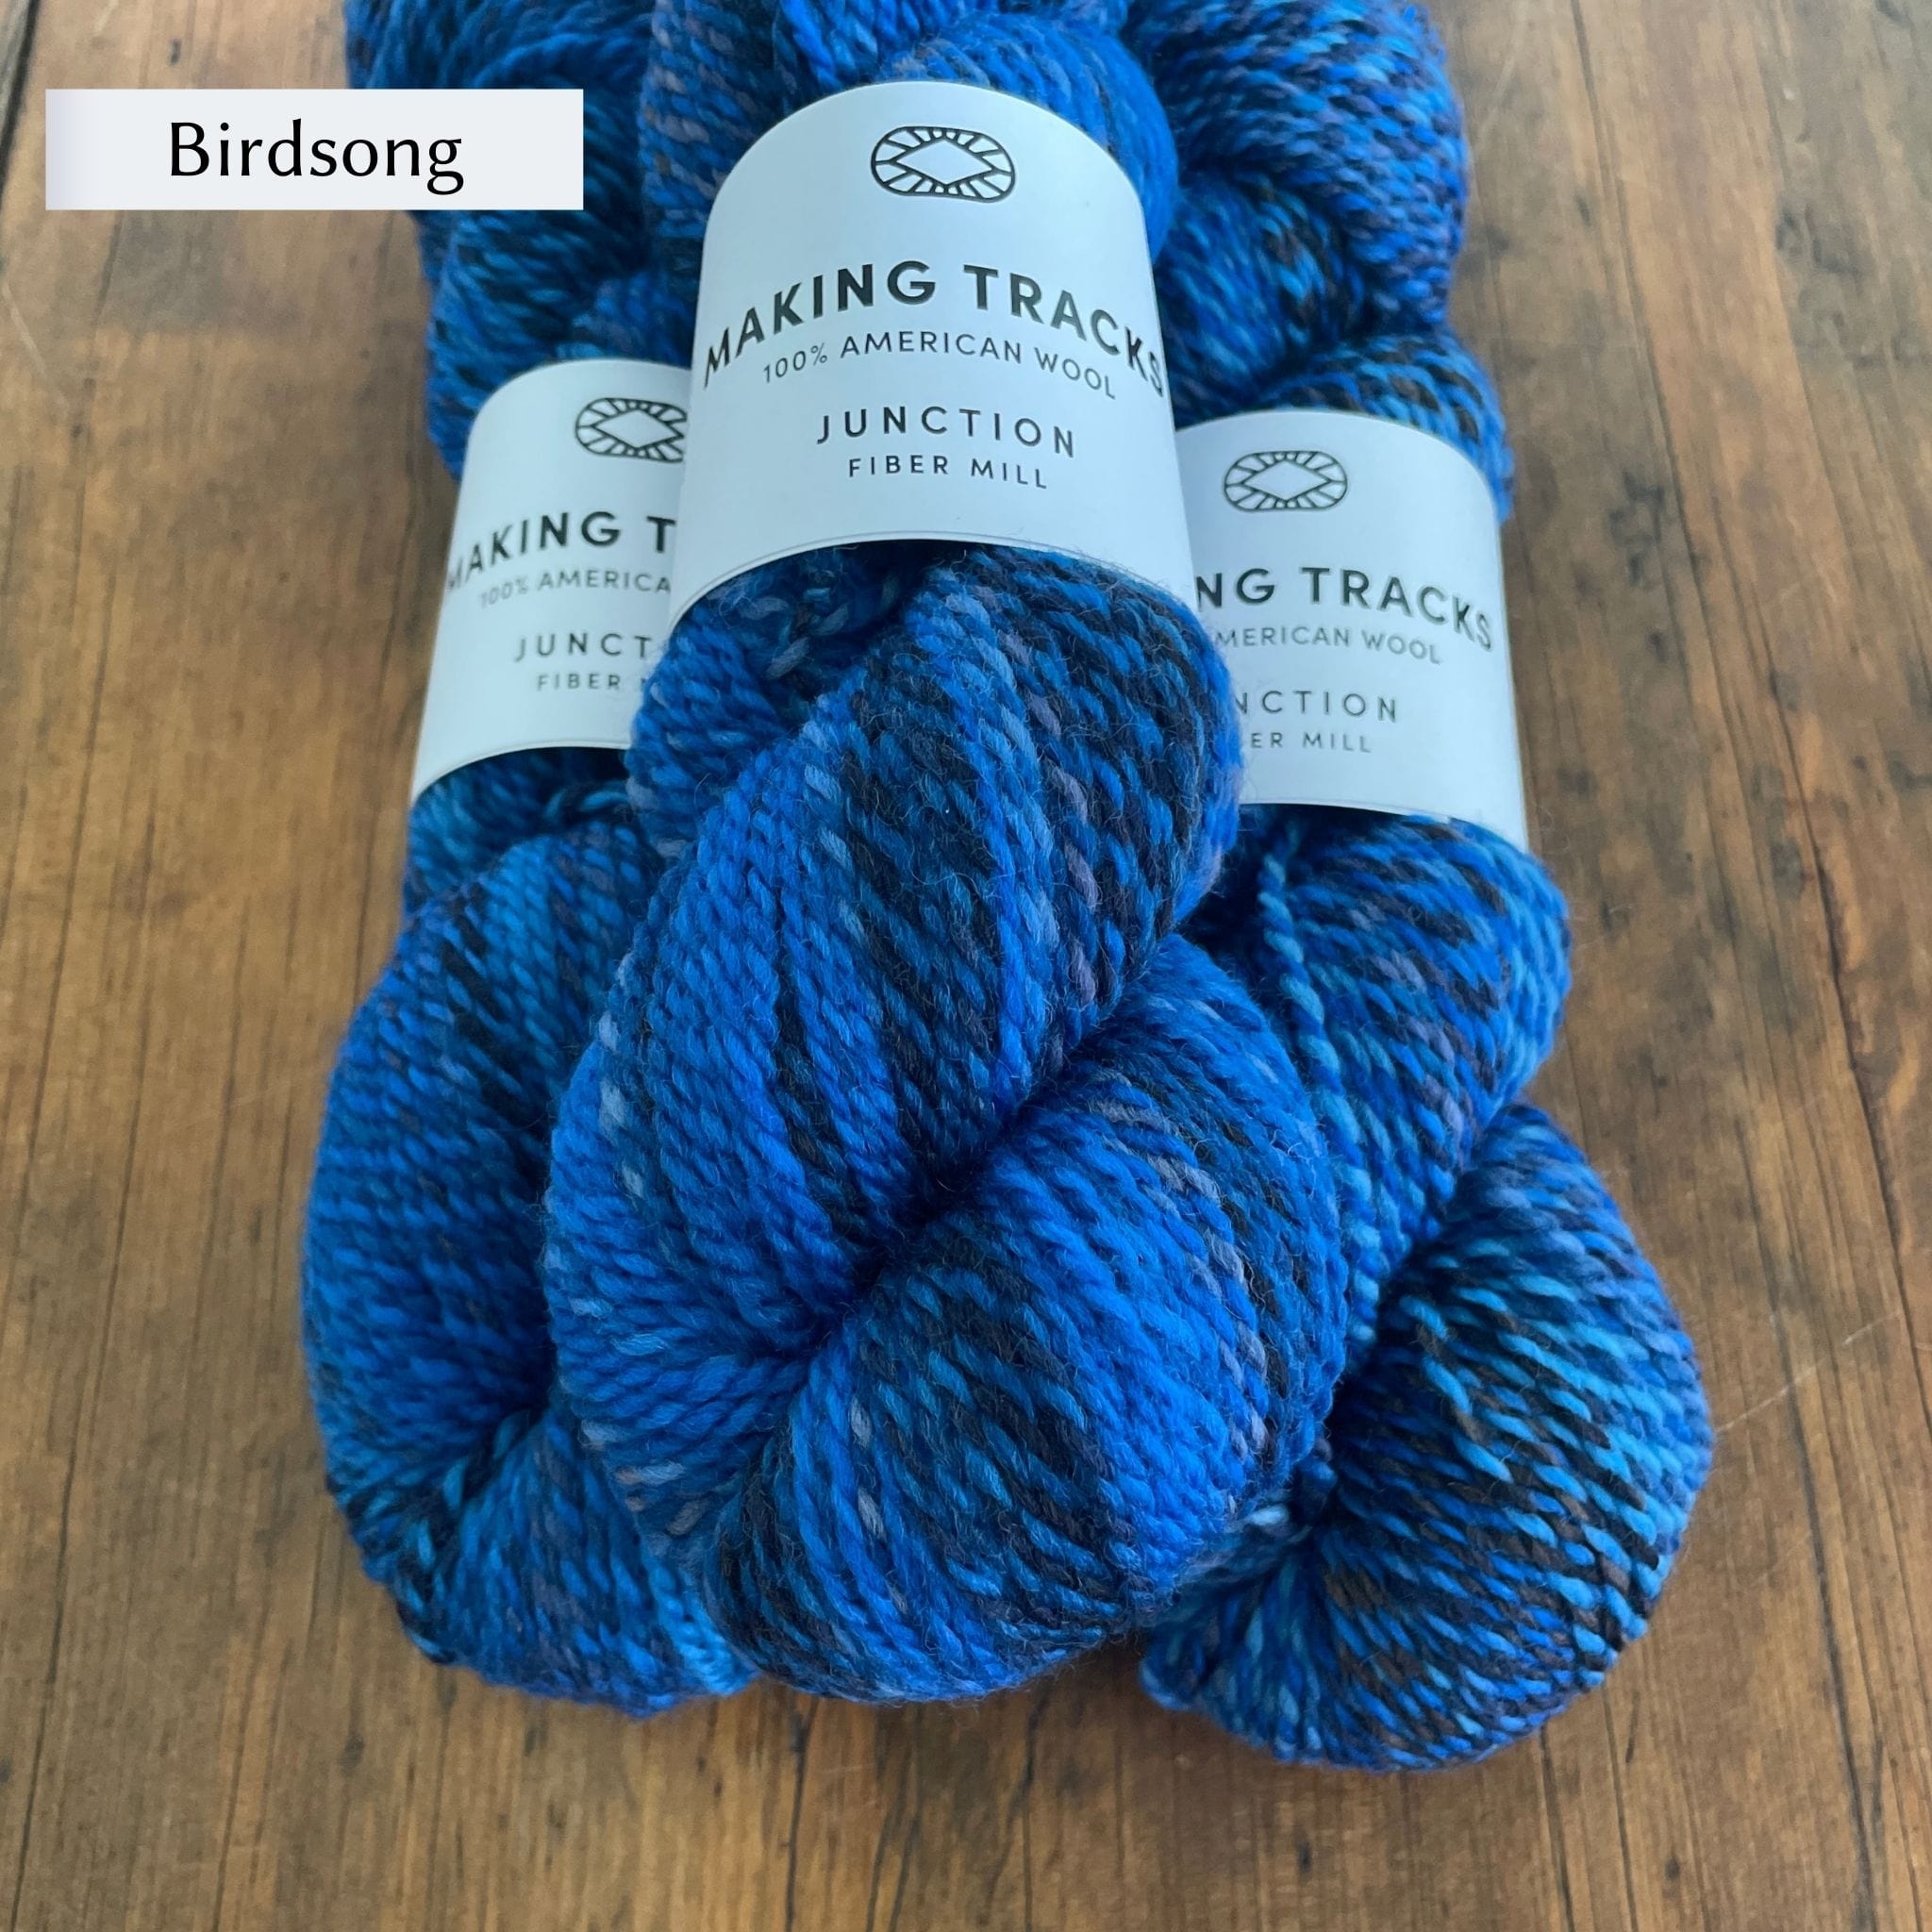 Junction Fiber Mill Making Tracks yarn, a DK weight, barberpole yarn, in color Birdsong, a variegated blue